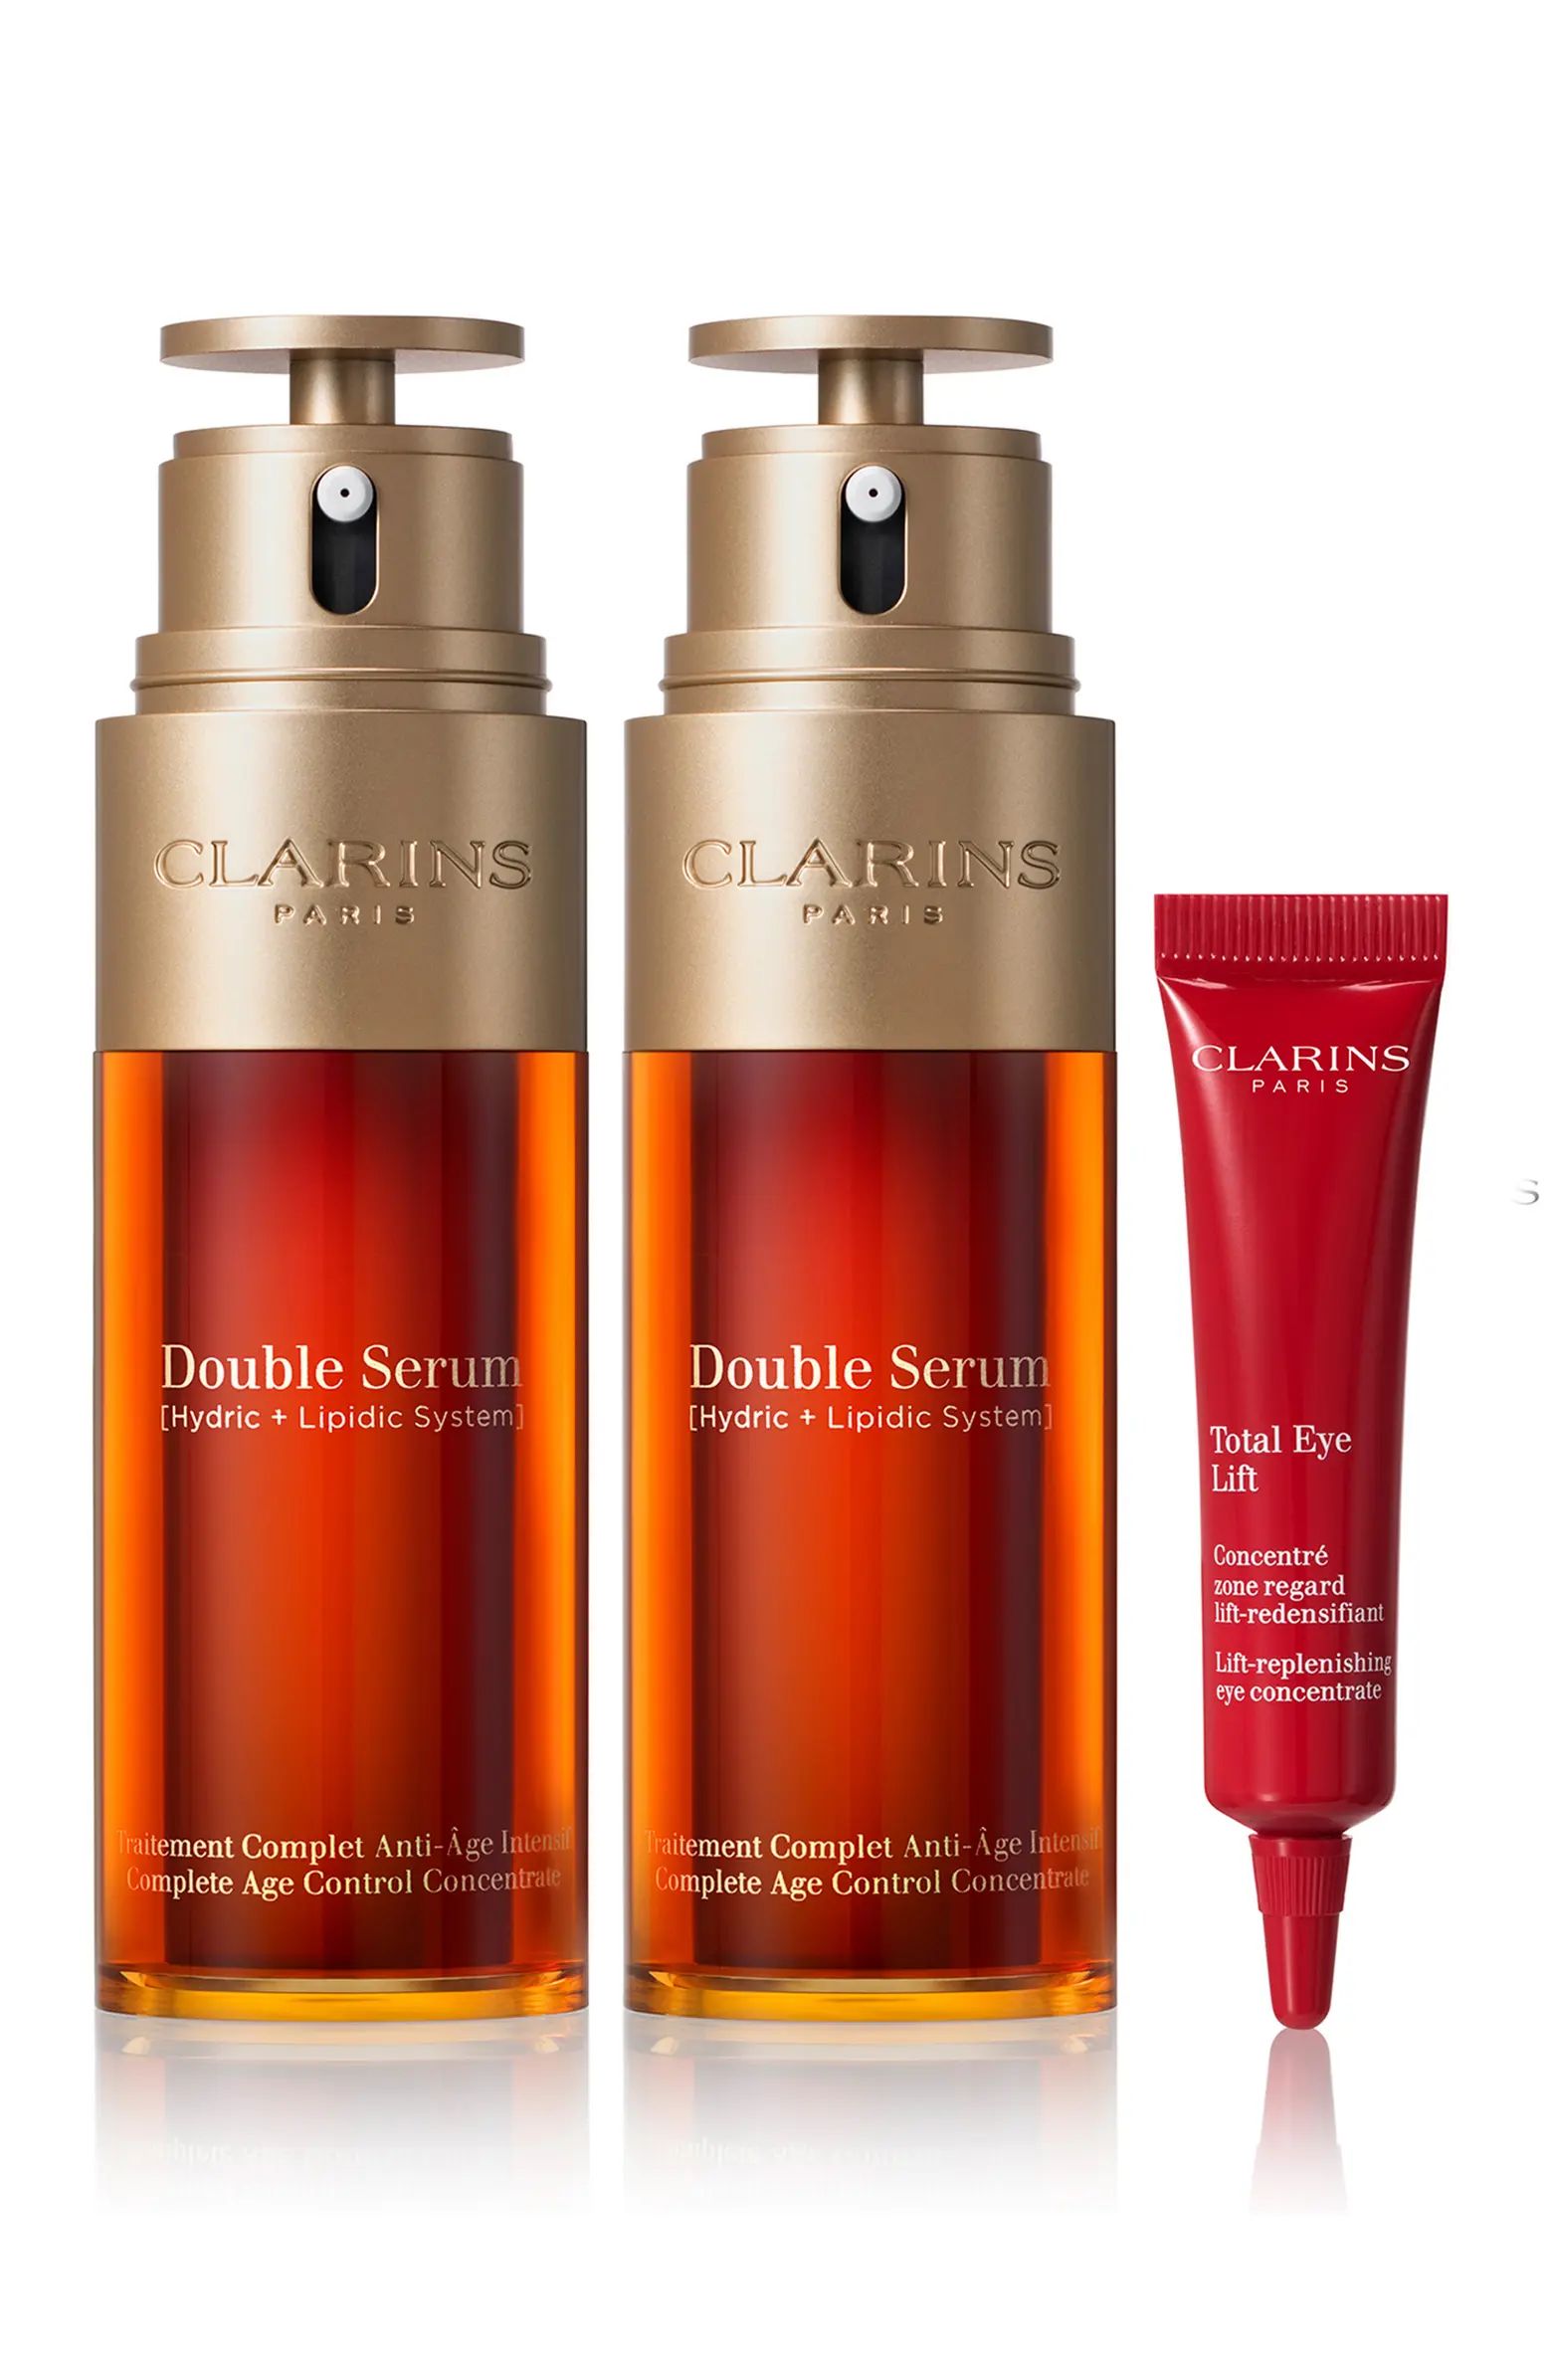 Double Serum Firming & Smoothing Anti-Aging Concentrate Duo Set $310 Value | Nordstrom